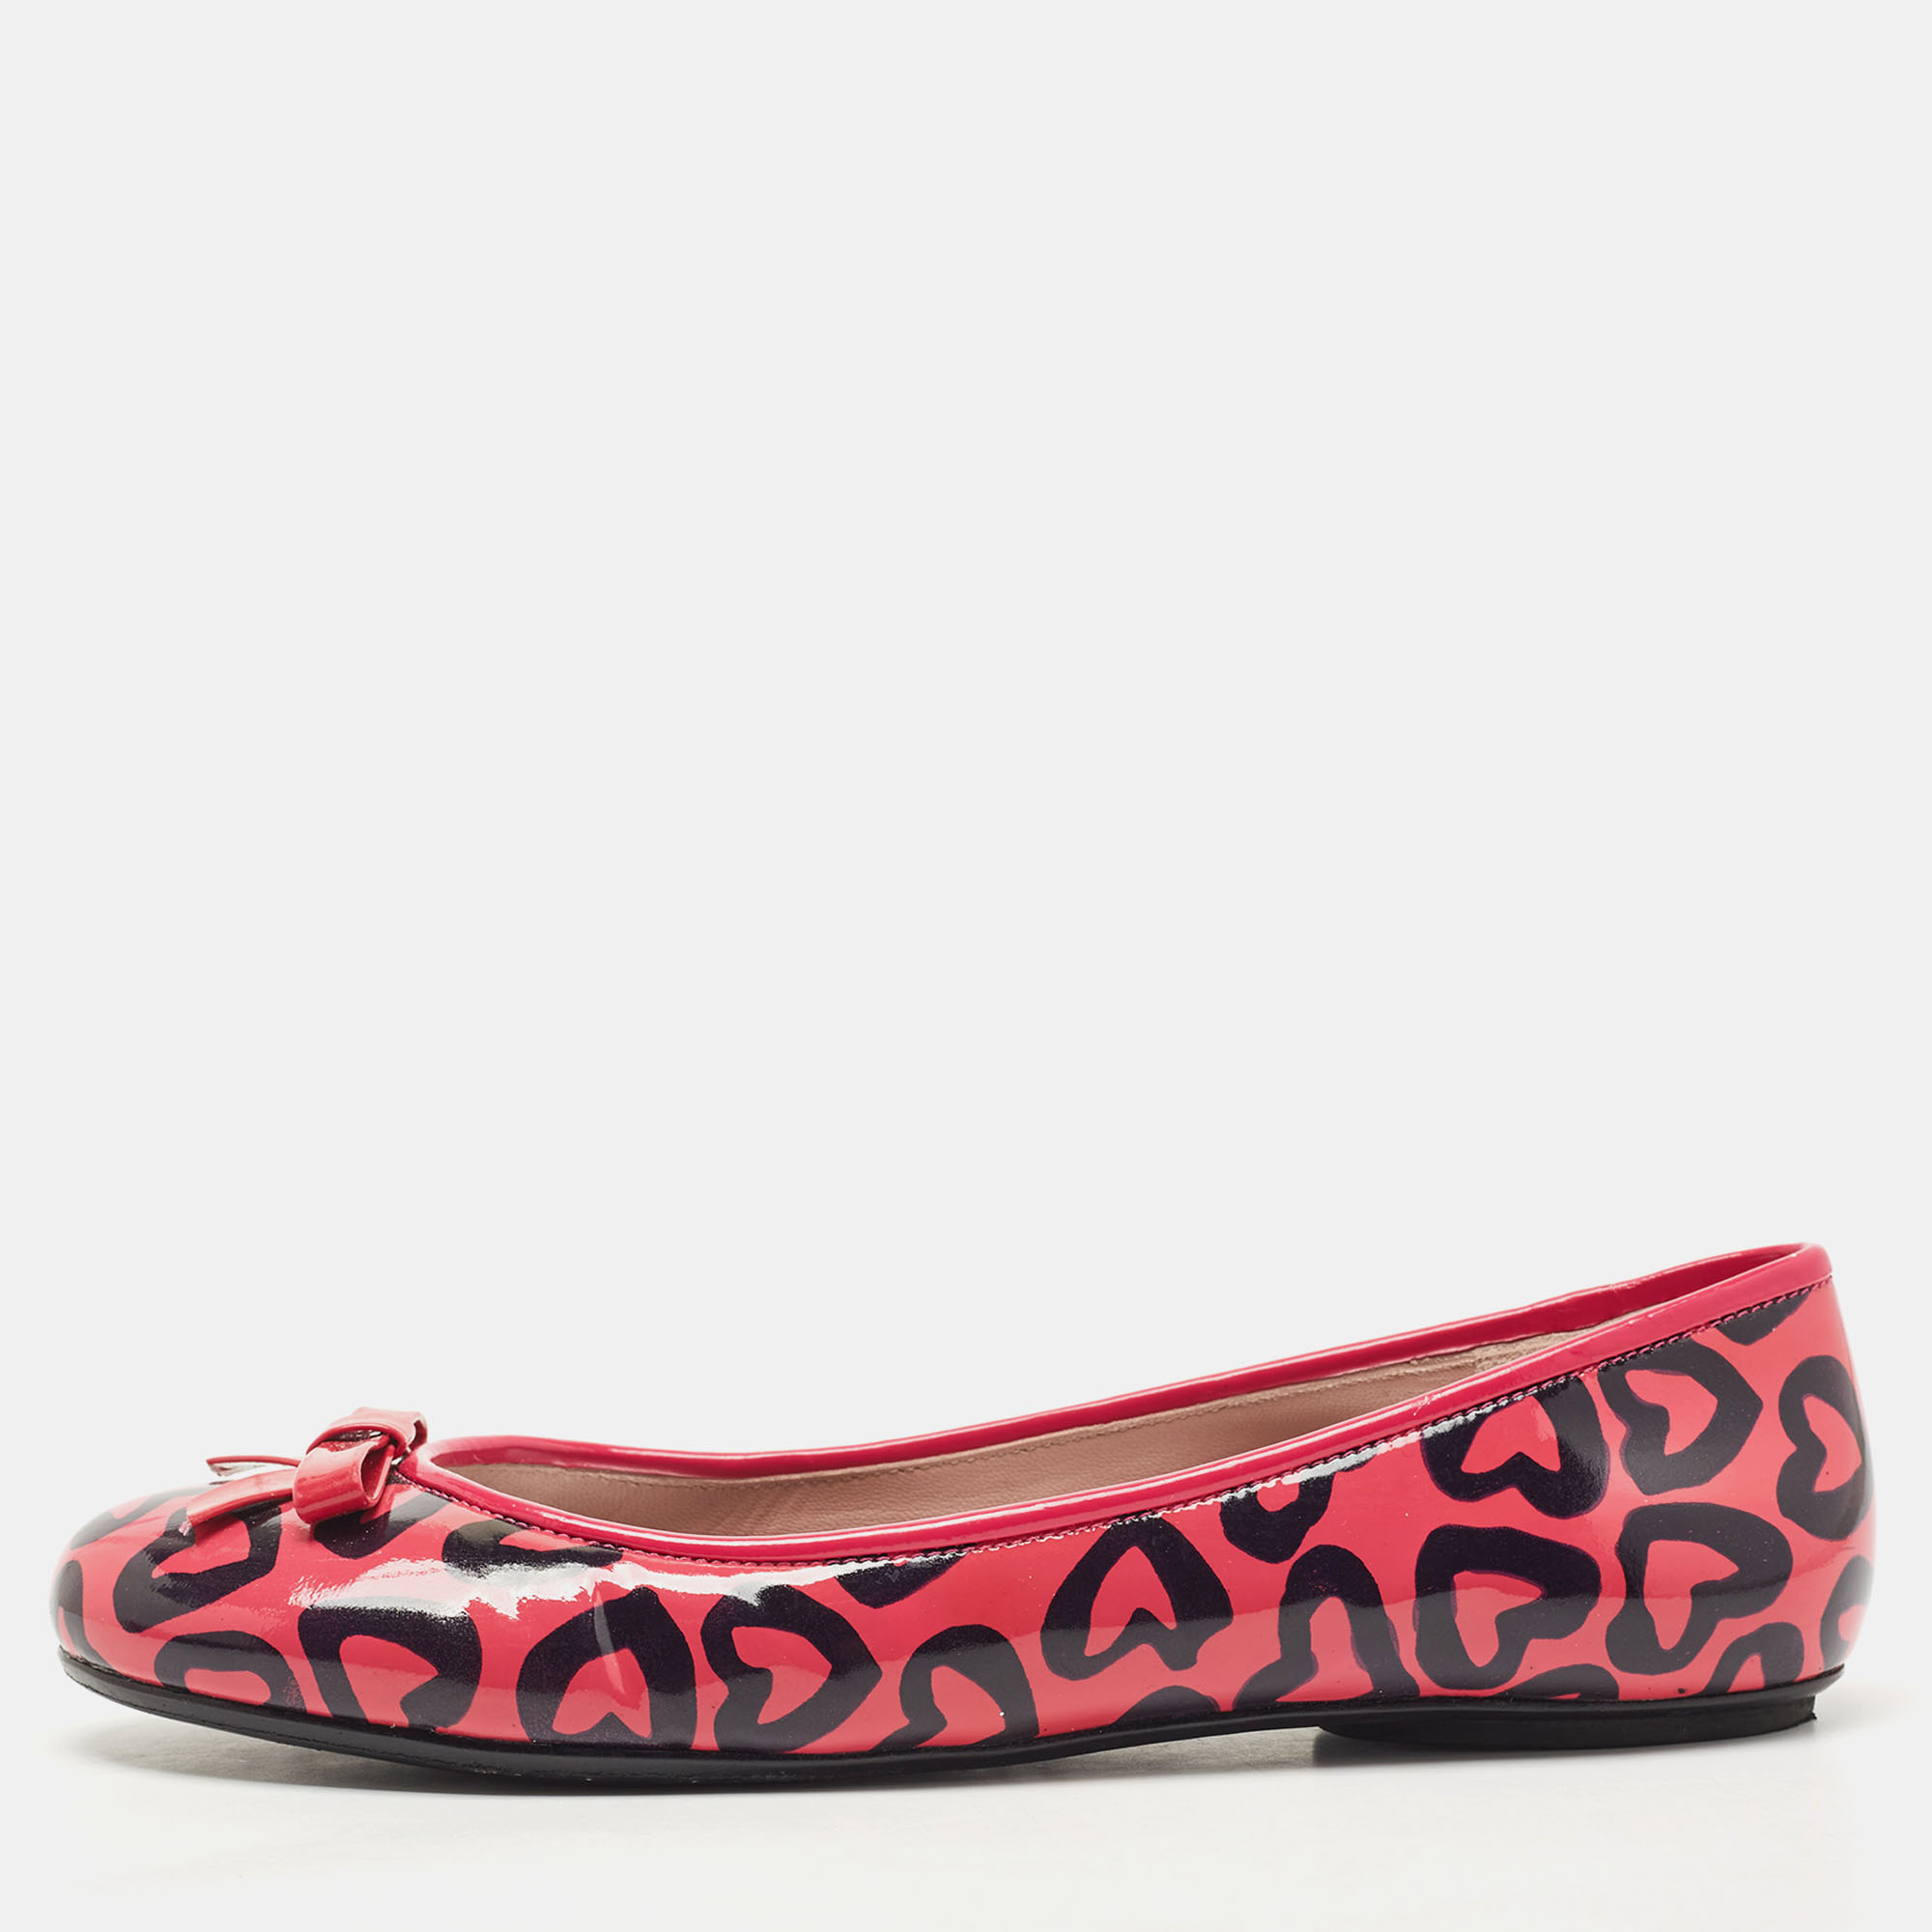 Marc By Marc Jacobs Pink/Black Heart Patent Leather Bow Ballet Flats Size 36